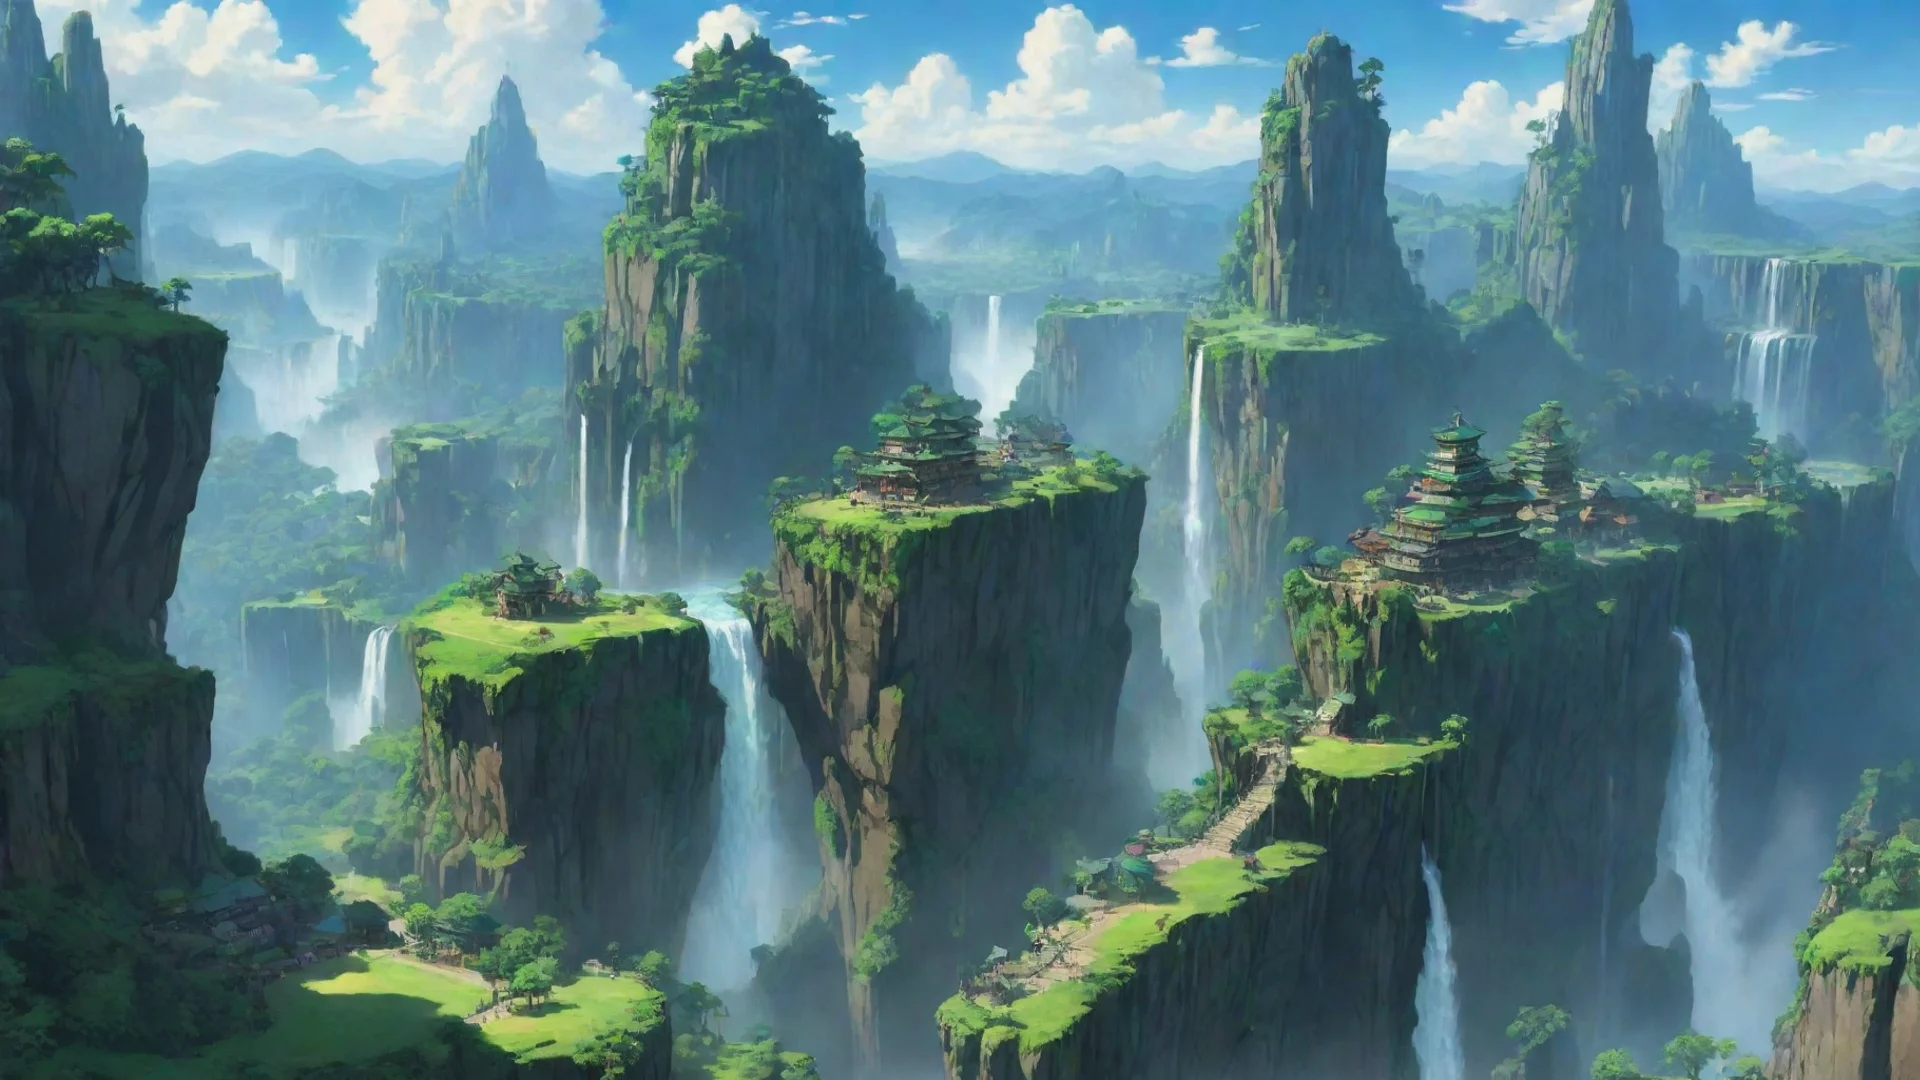 aigiant green planet in sky anime ghibli city on floating cliffs with waterfalls best hd aesthetic wow wide